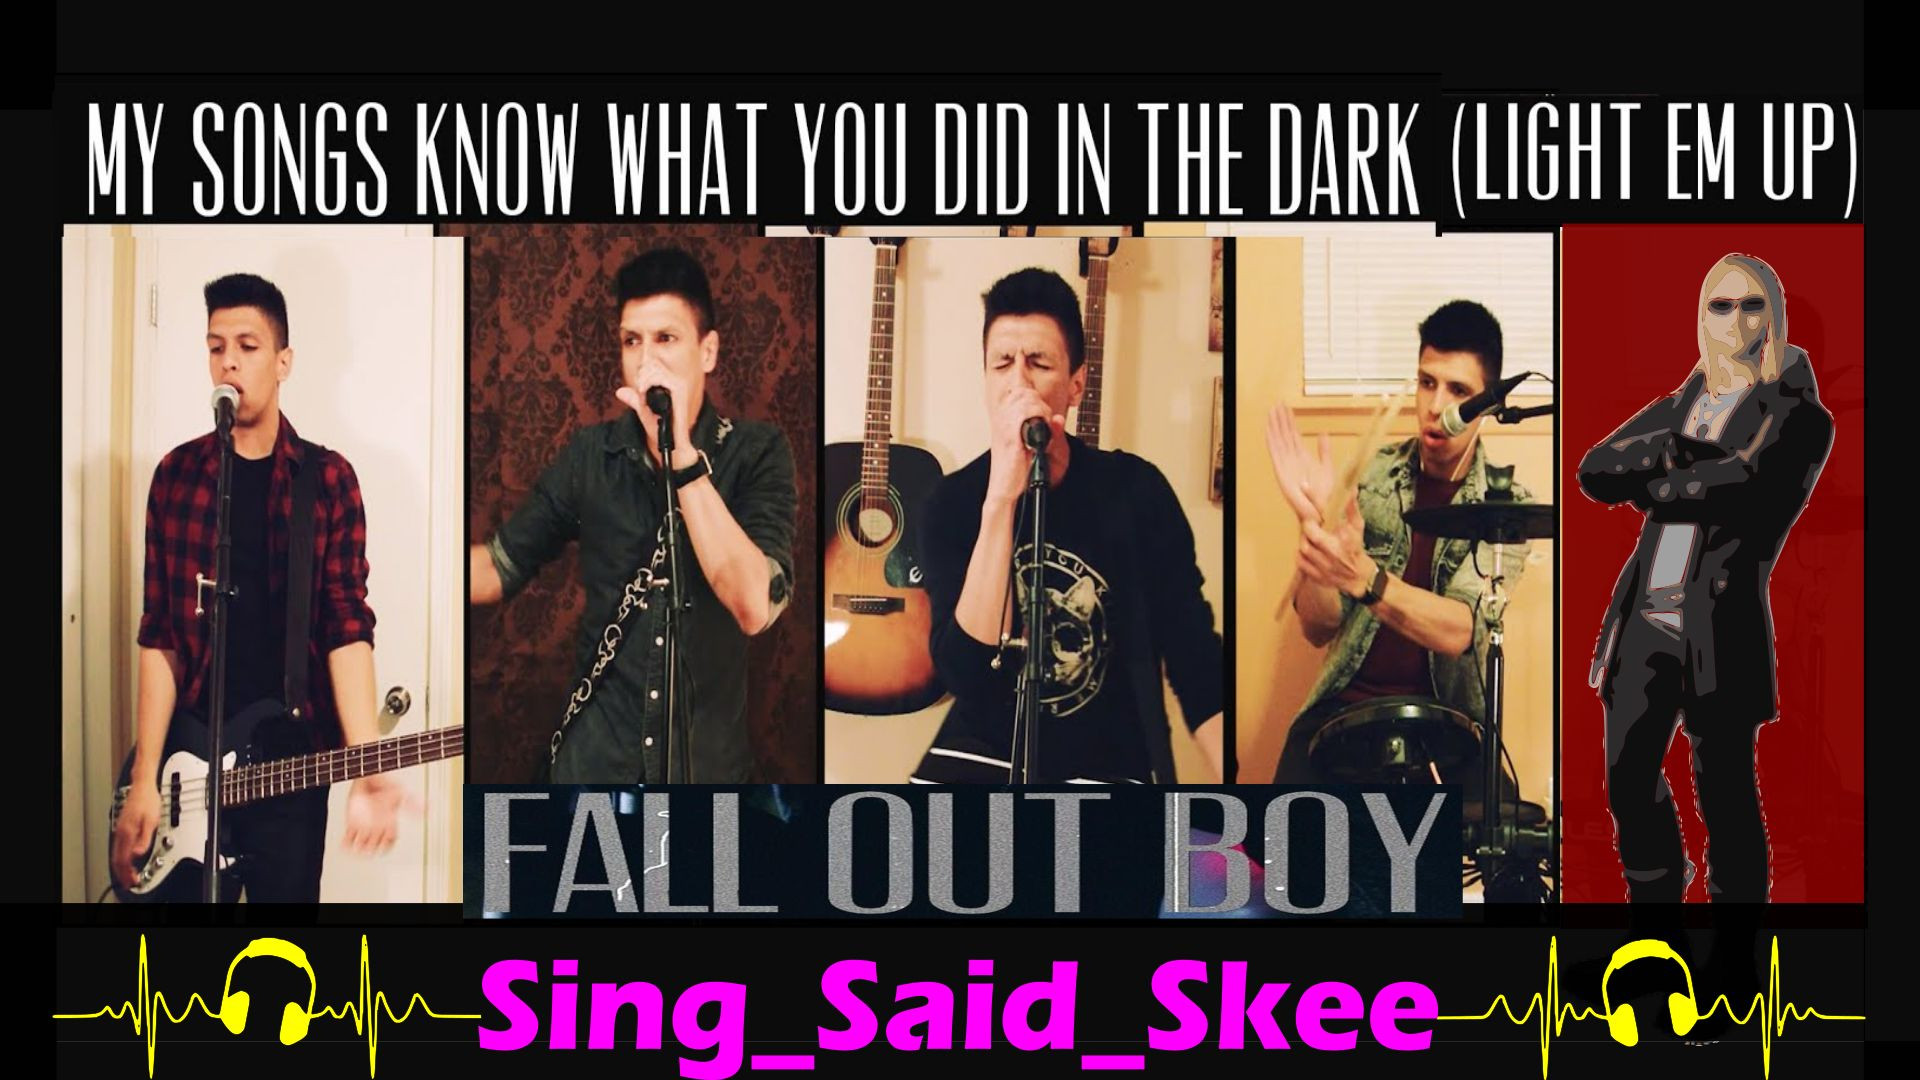 My Songs Know What You Did In The Dark (Light Em Up) - Fall Out Boy - Sing_Said_Skee